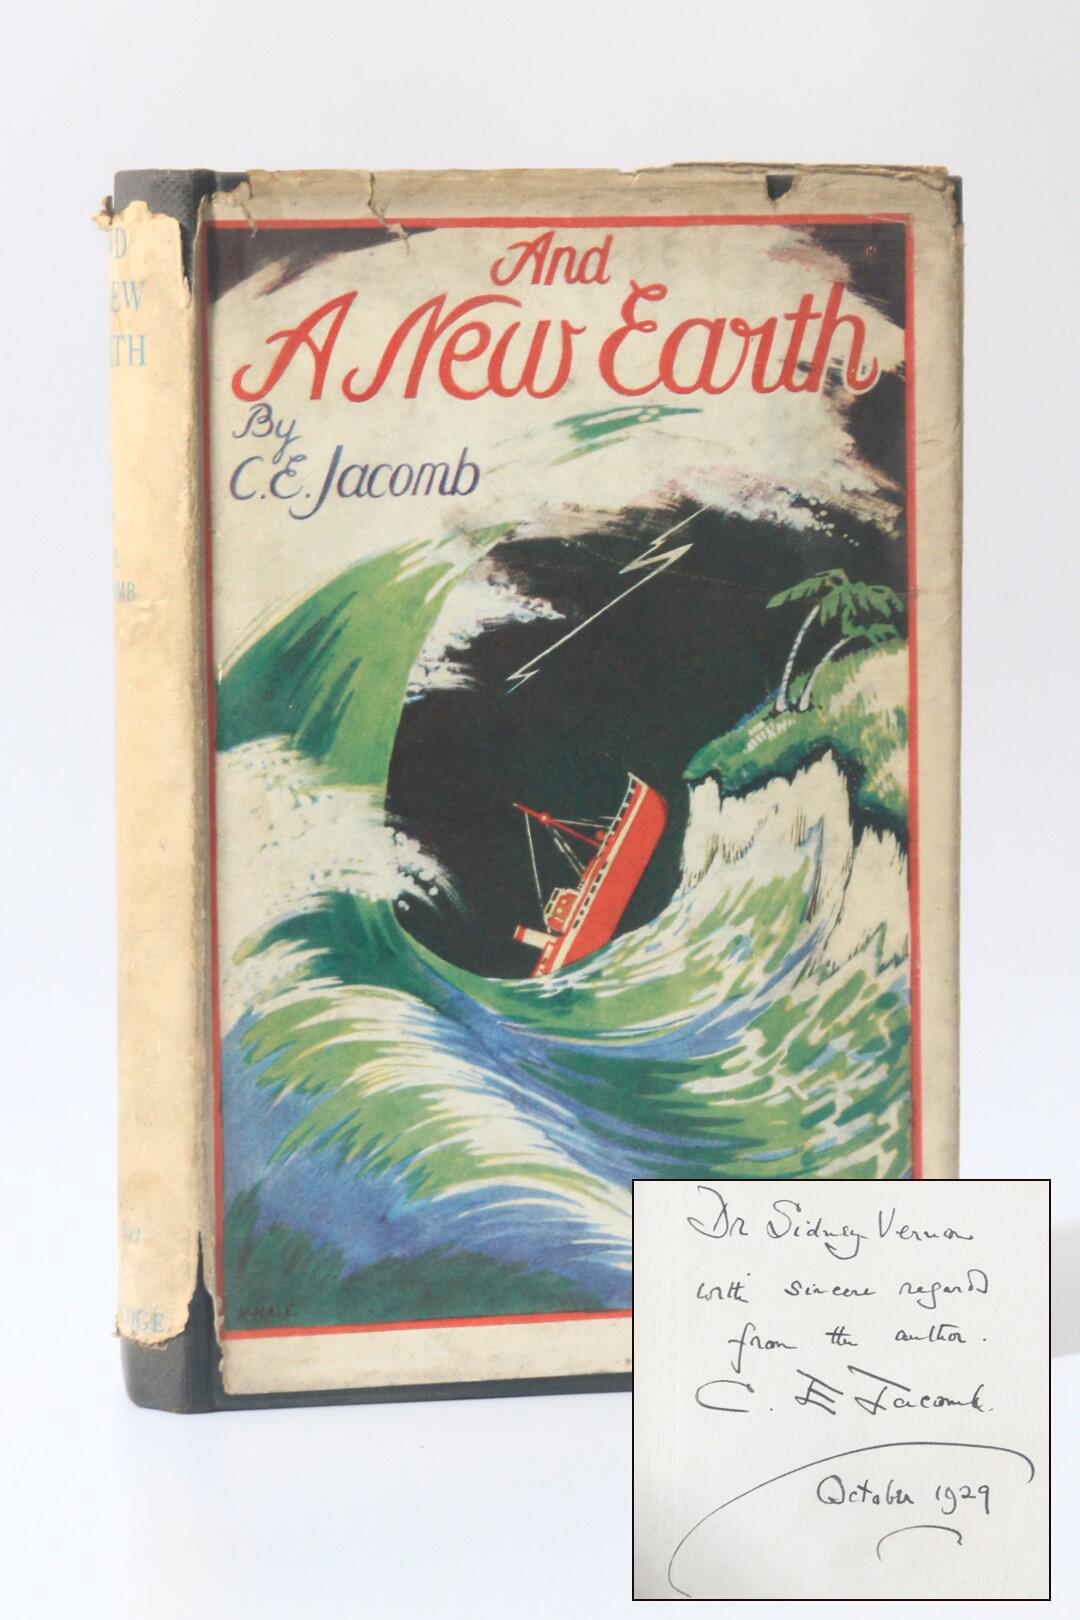 C.E. Jacomb - And A New Earth - George Routledge & Sons, 1926, Signed First Edition.